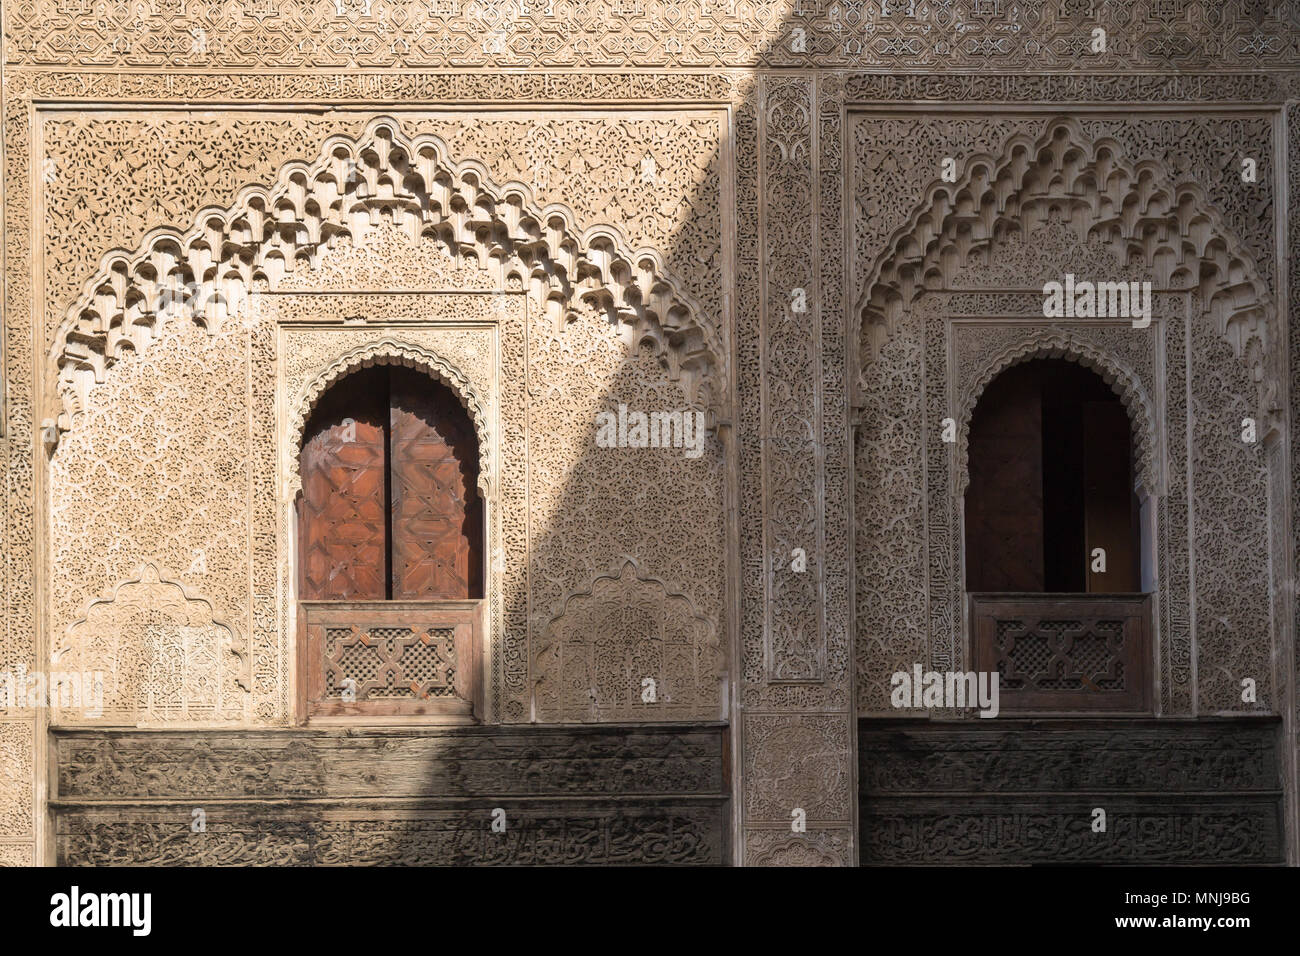 Ornate walls made of stone with traditional details. Islamic school Madrasa Bou Inania in Fez, Morocco. Stock Photo